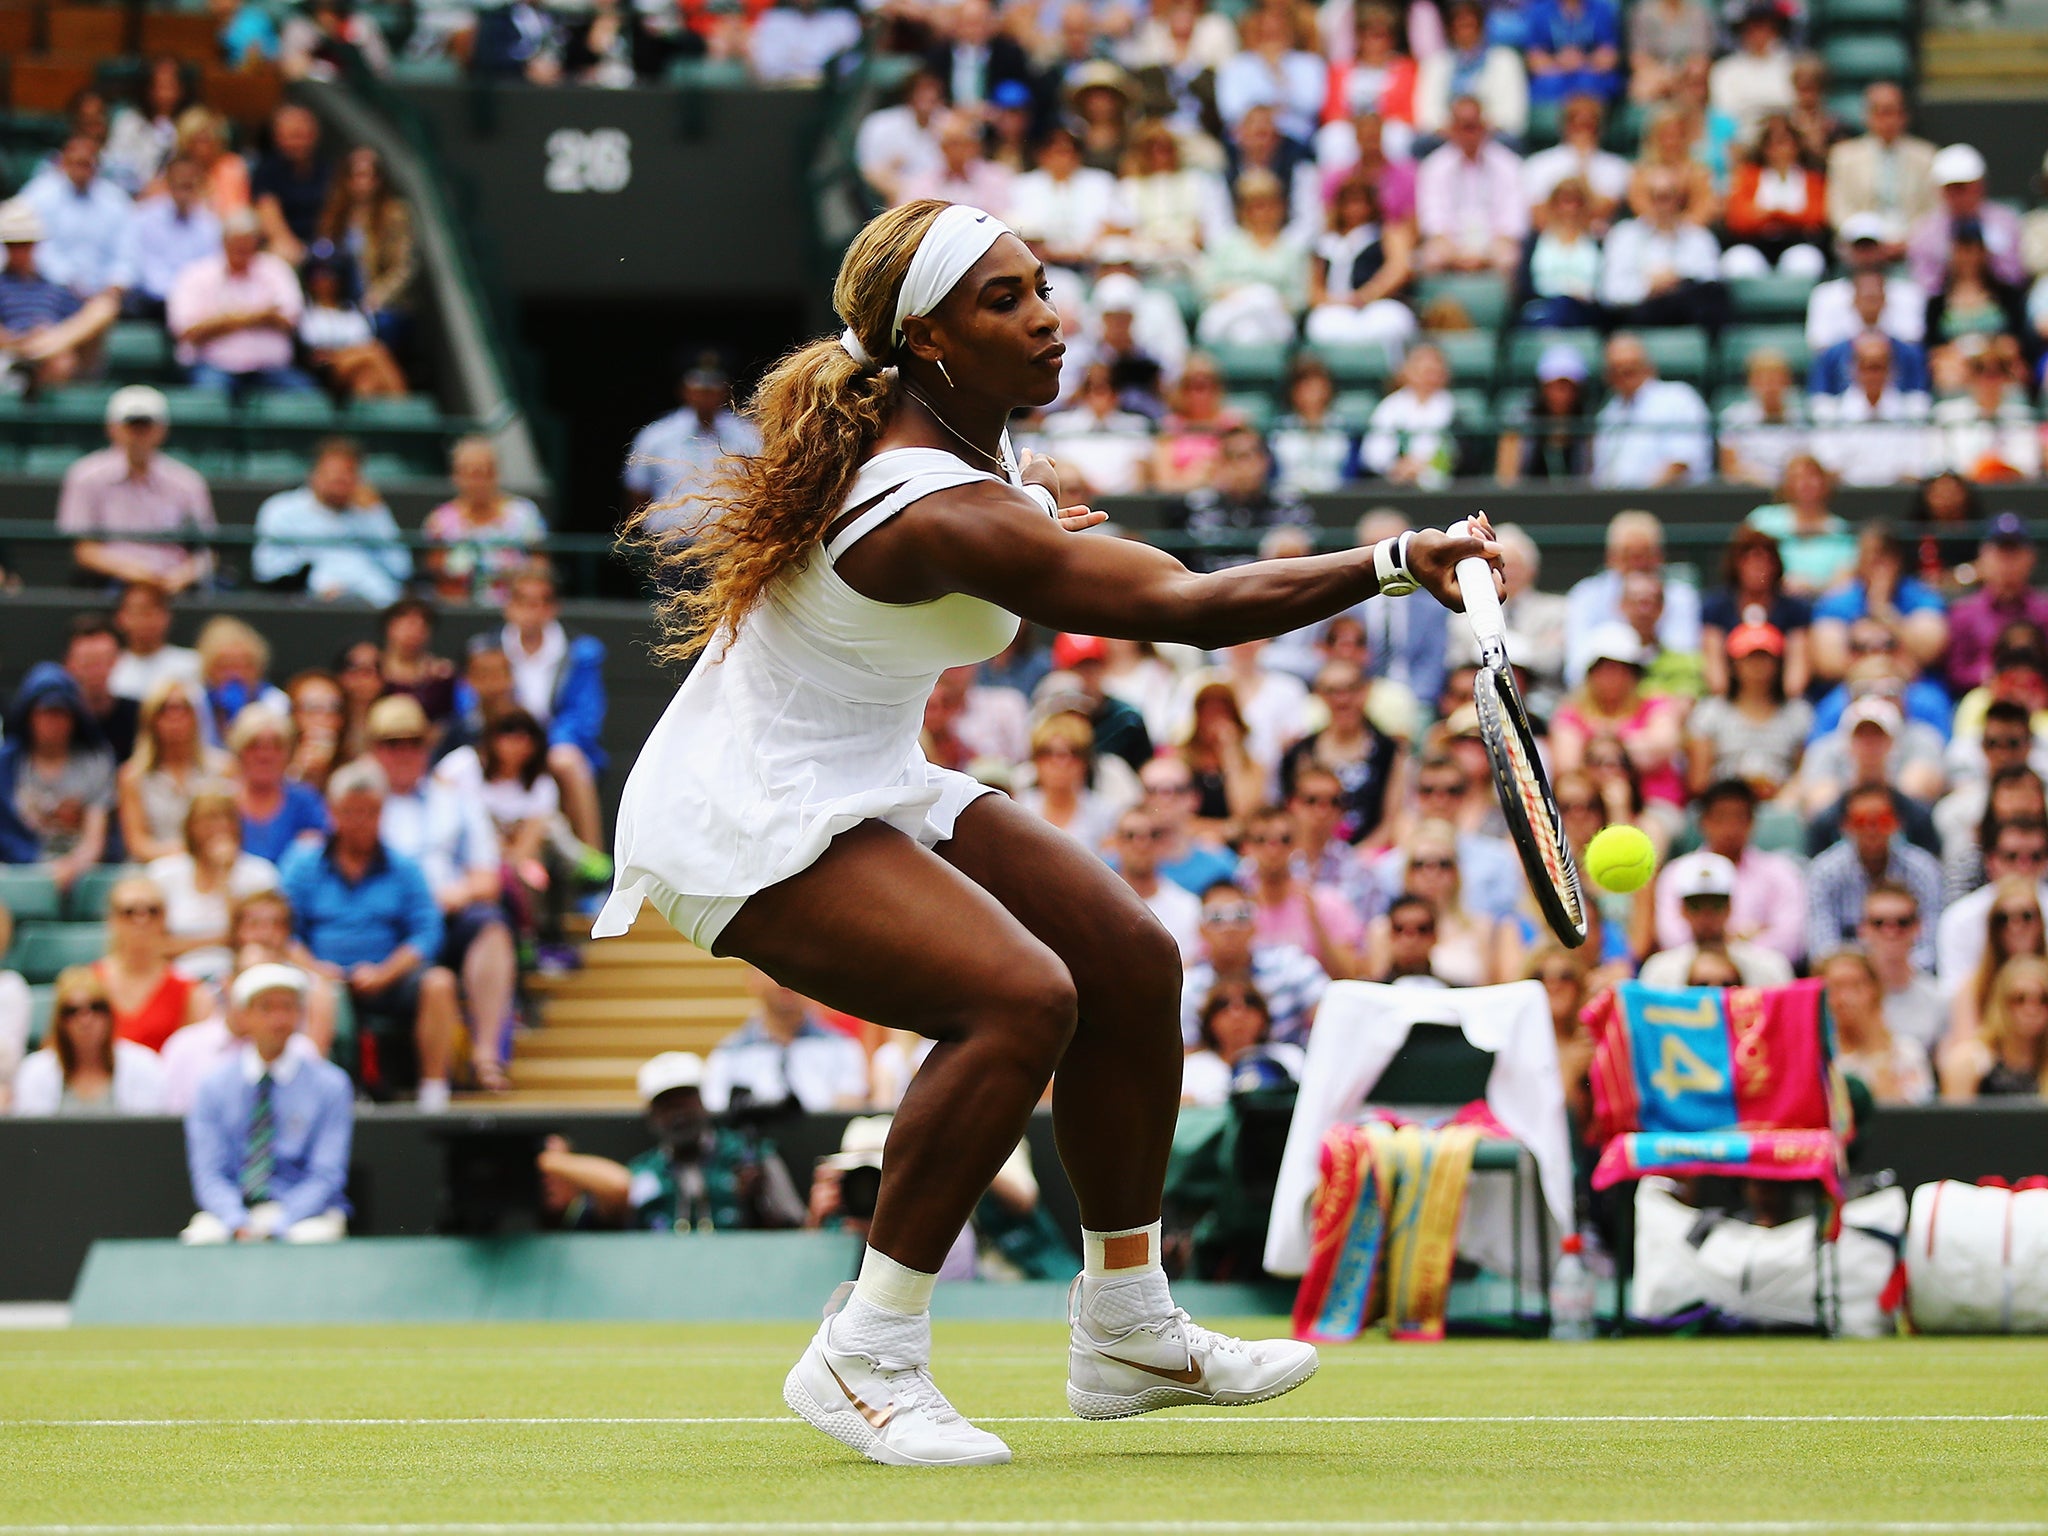 Serena Williams takes a shot during her victory over Chanelle Scheepers